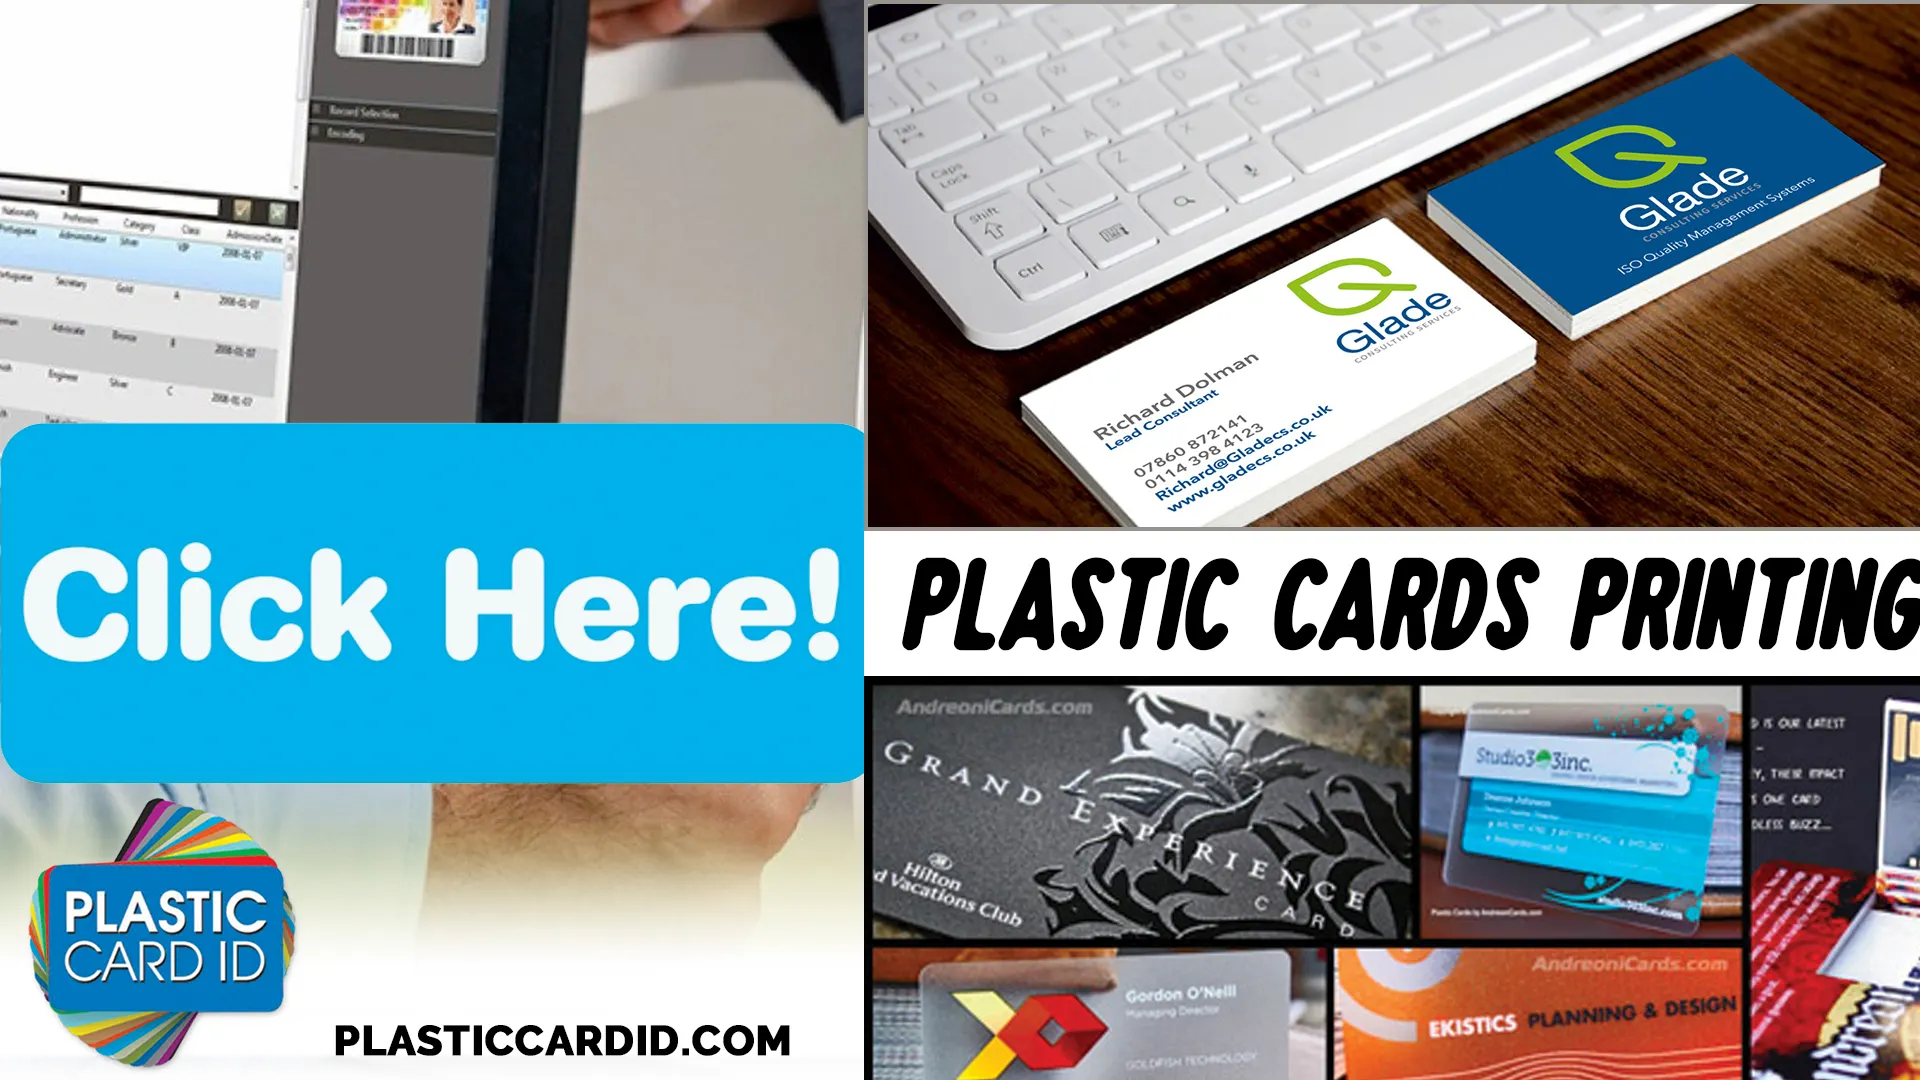 Plastic Cards as Instruments of Loyalty and Engagement